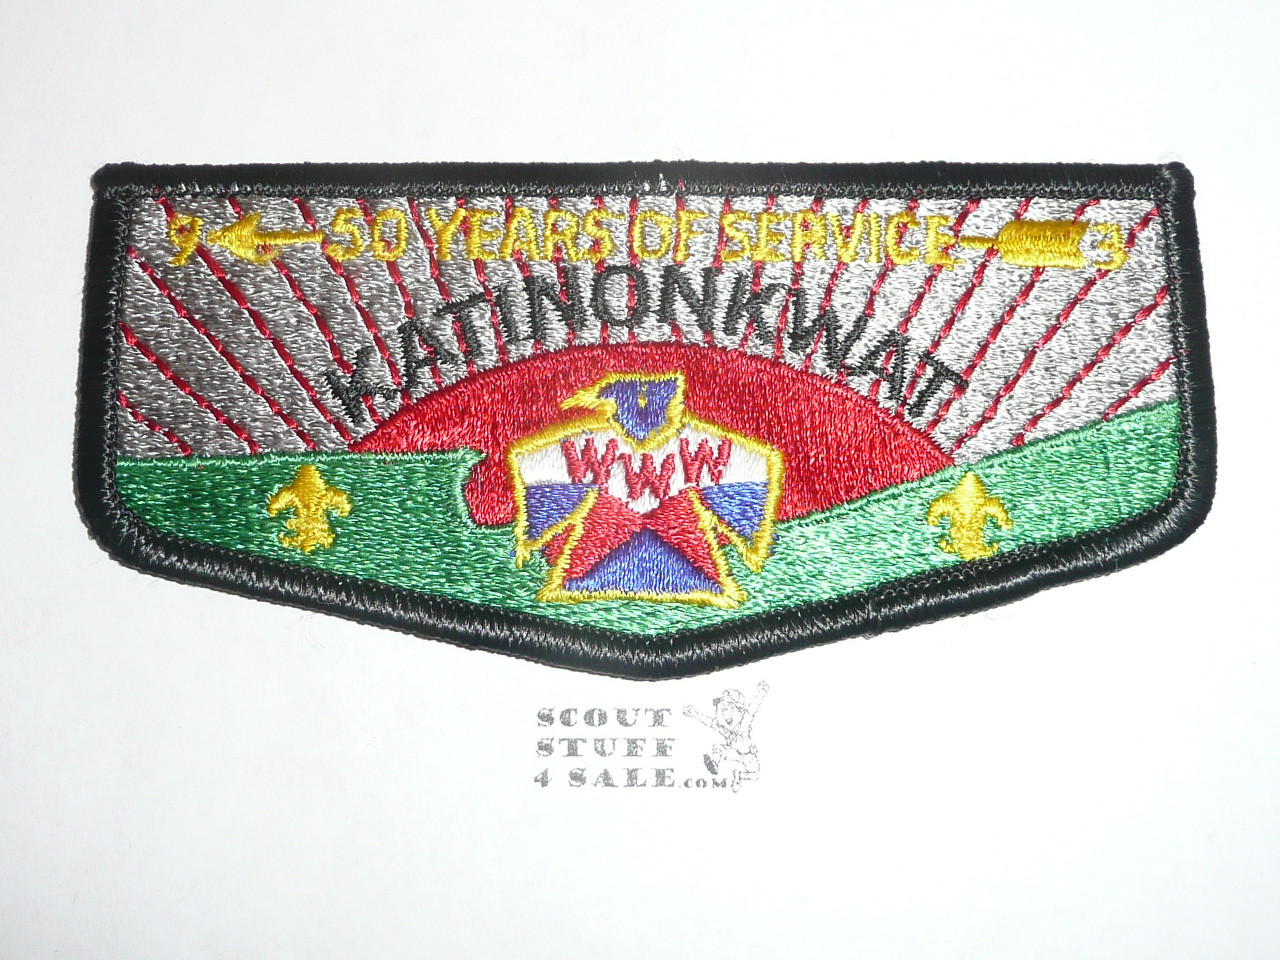 Order of the Arrow Lodge #93 Katinonkwat s6 50th Anniversary Flap Patch - Boy Scout